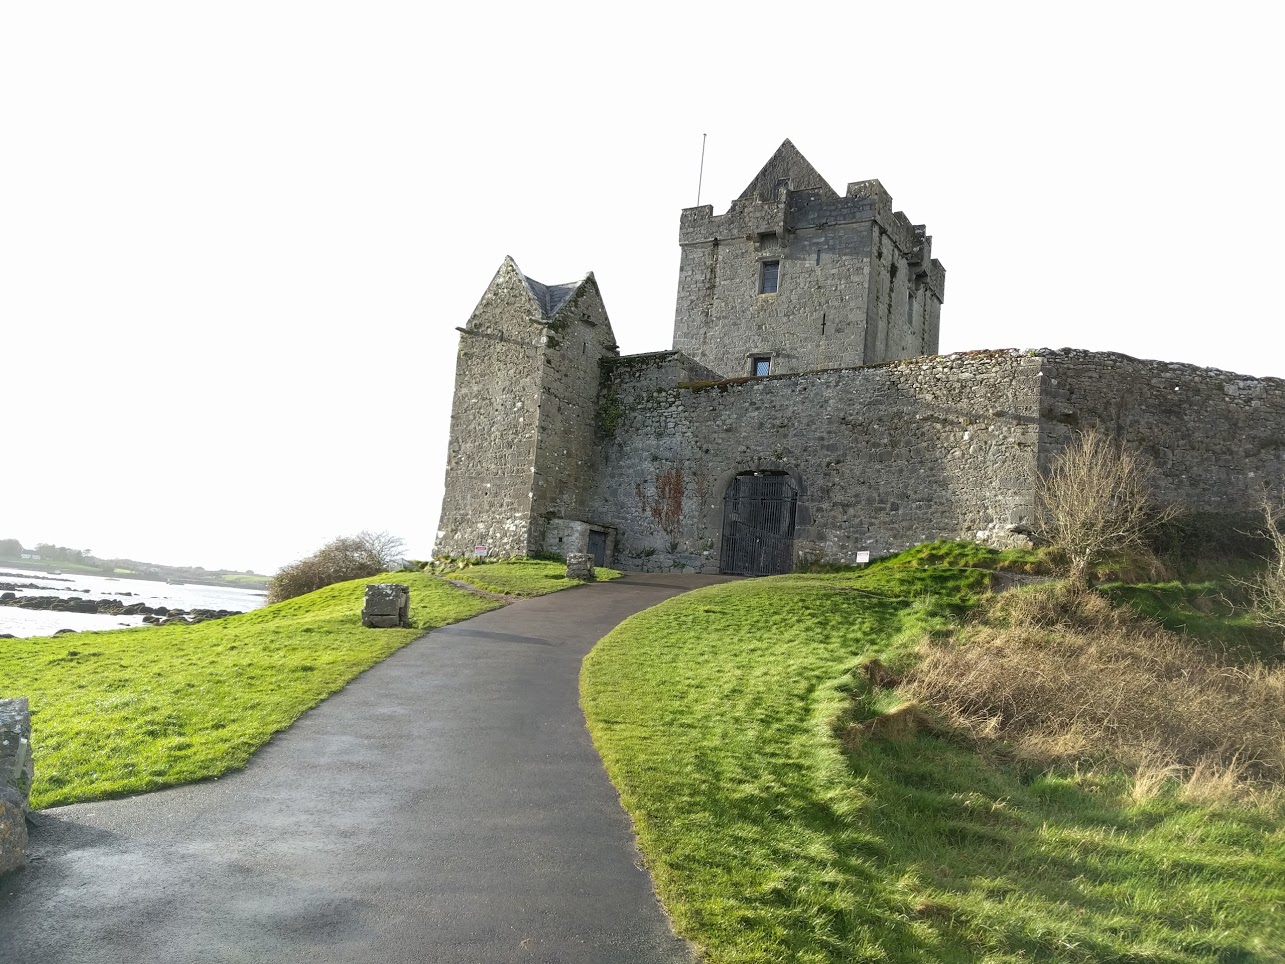 Dunguaire Castle, just inland from the Cliffs of Moher